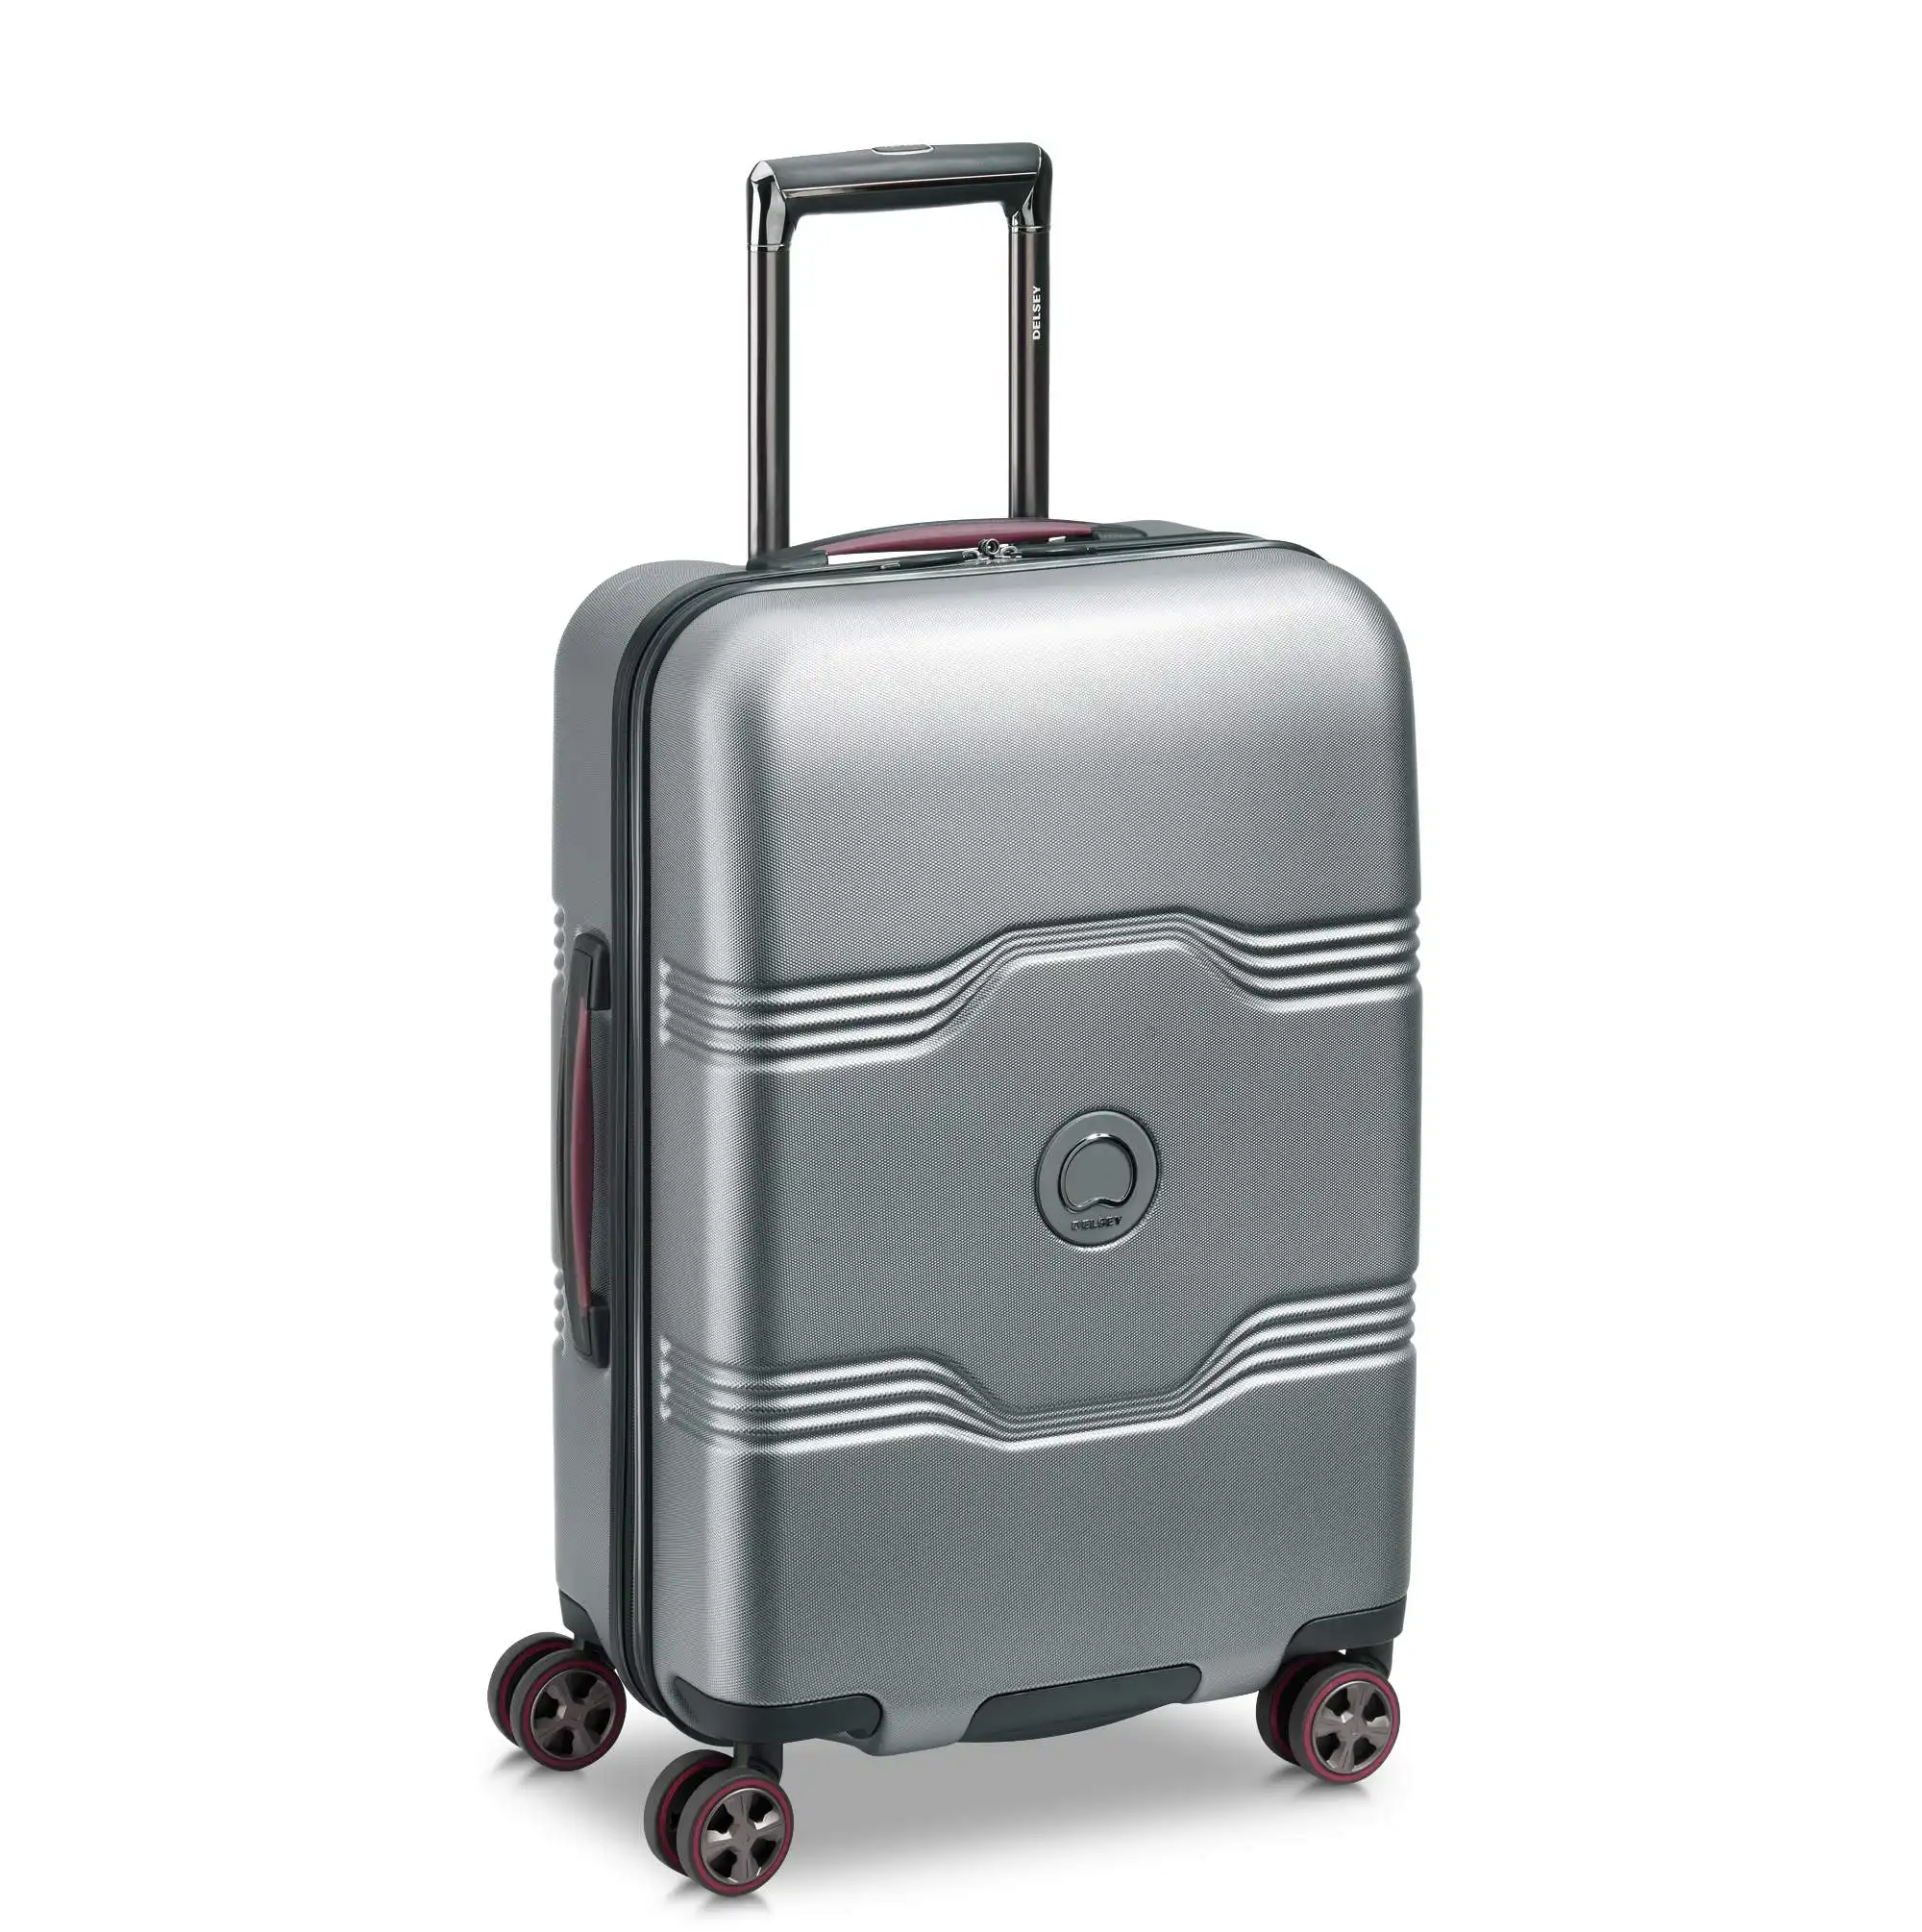 21" Delsey Accelerate Carry-on Spinner Luggage (Graphite)